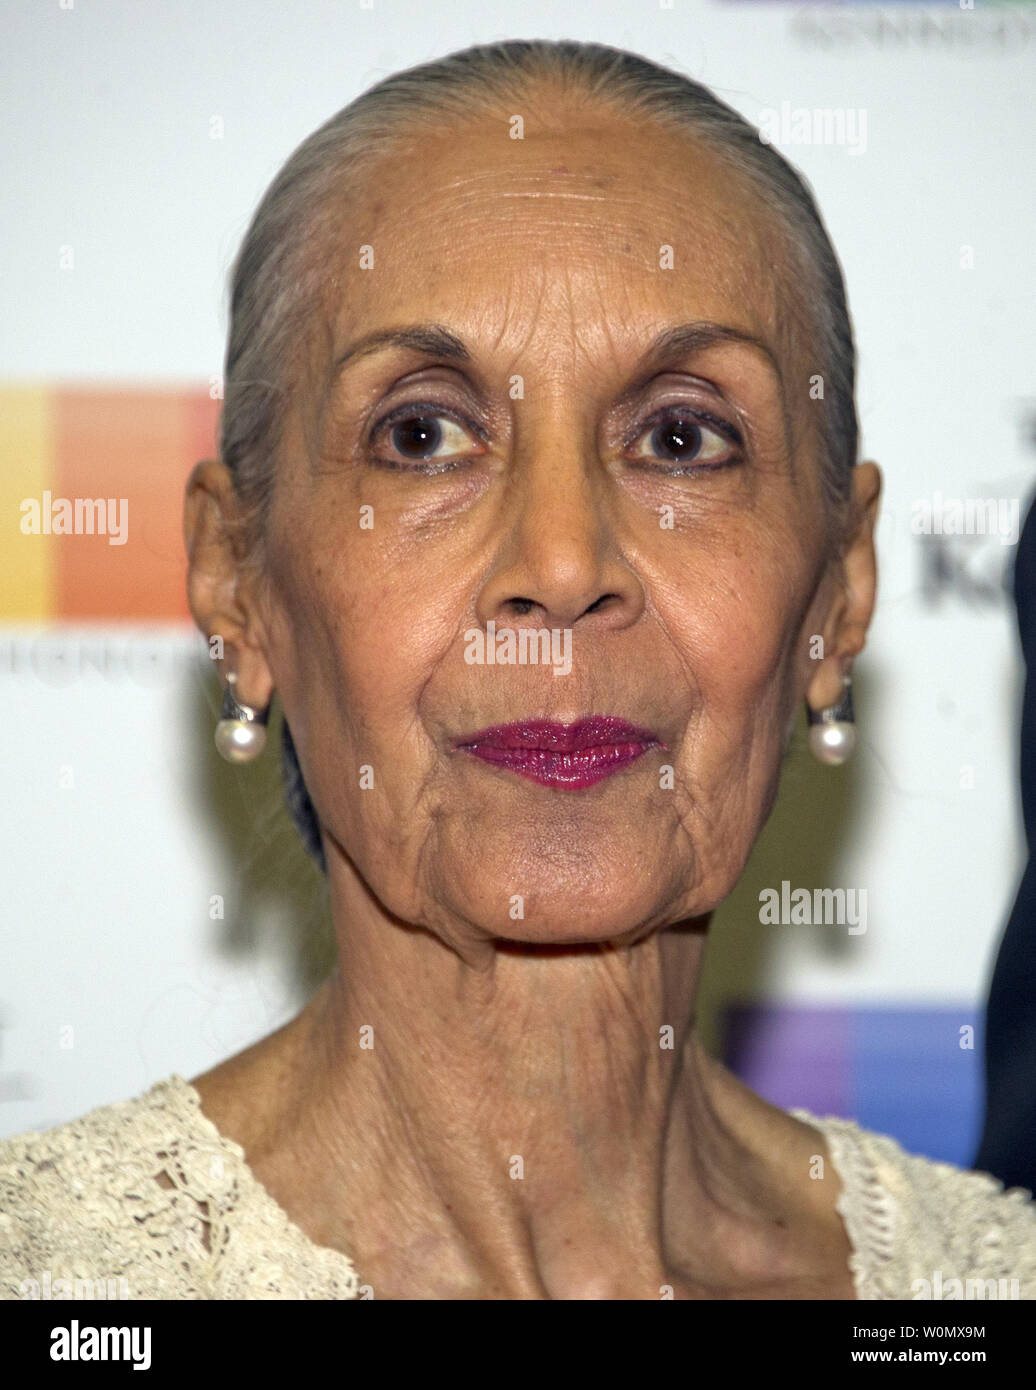 Carmen de LaVallade arrives for the formal Artist's Dinner honoring the recipients of the 40th Annual Kennedy Center Honors hosted by United States Secretary of State Rex Tillerson at the US Department of State in Washington, D.C. on Saturday, December 2, 2017. The 2017 honorees are: American dancer and choreographer Carmen de Lavallade; Cuban American singer-songwriter and actress Gloria Estefan; American hip hop artist and entertainment icon LL COOL J; American television writer and producer Norman Lear; and American musician and record producer Lionel Richie.  Photo by Ron Sachs/UPI Stock Photo